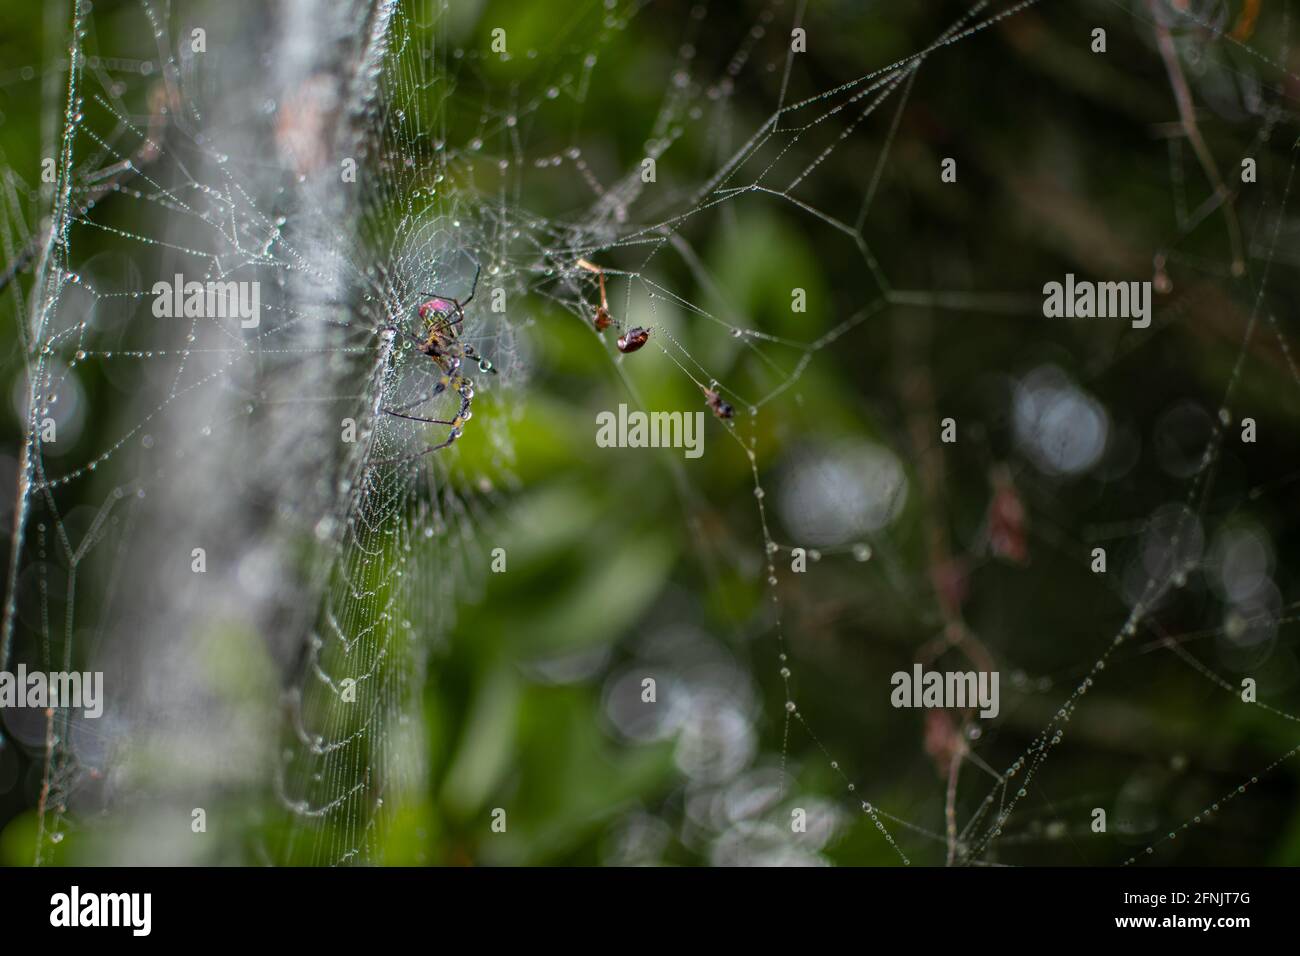 A spider in its spider web in the forest with dew rain drops on its long legs, Shan state, Myanmar Stock Photo